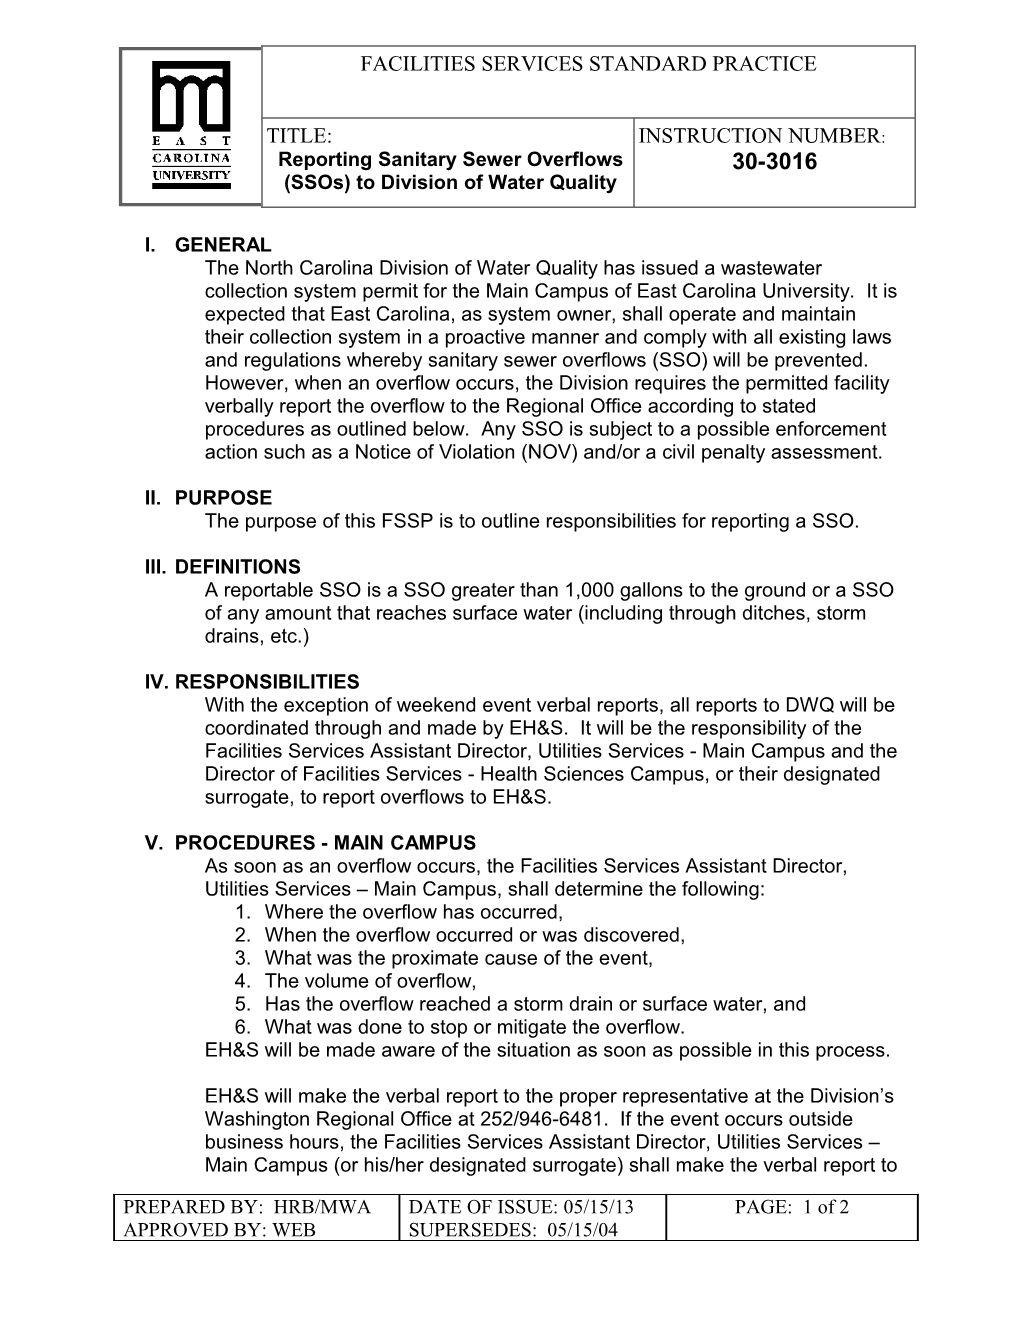 FSSP 30-3016; Reporting Sanitary Sewer Overflows (Ssos) to Division of Water Quality